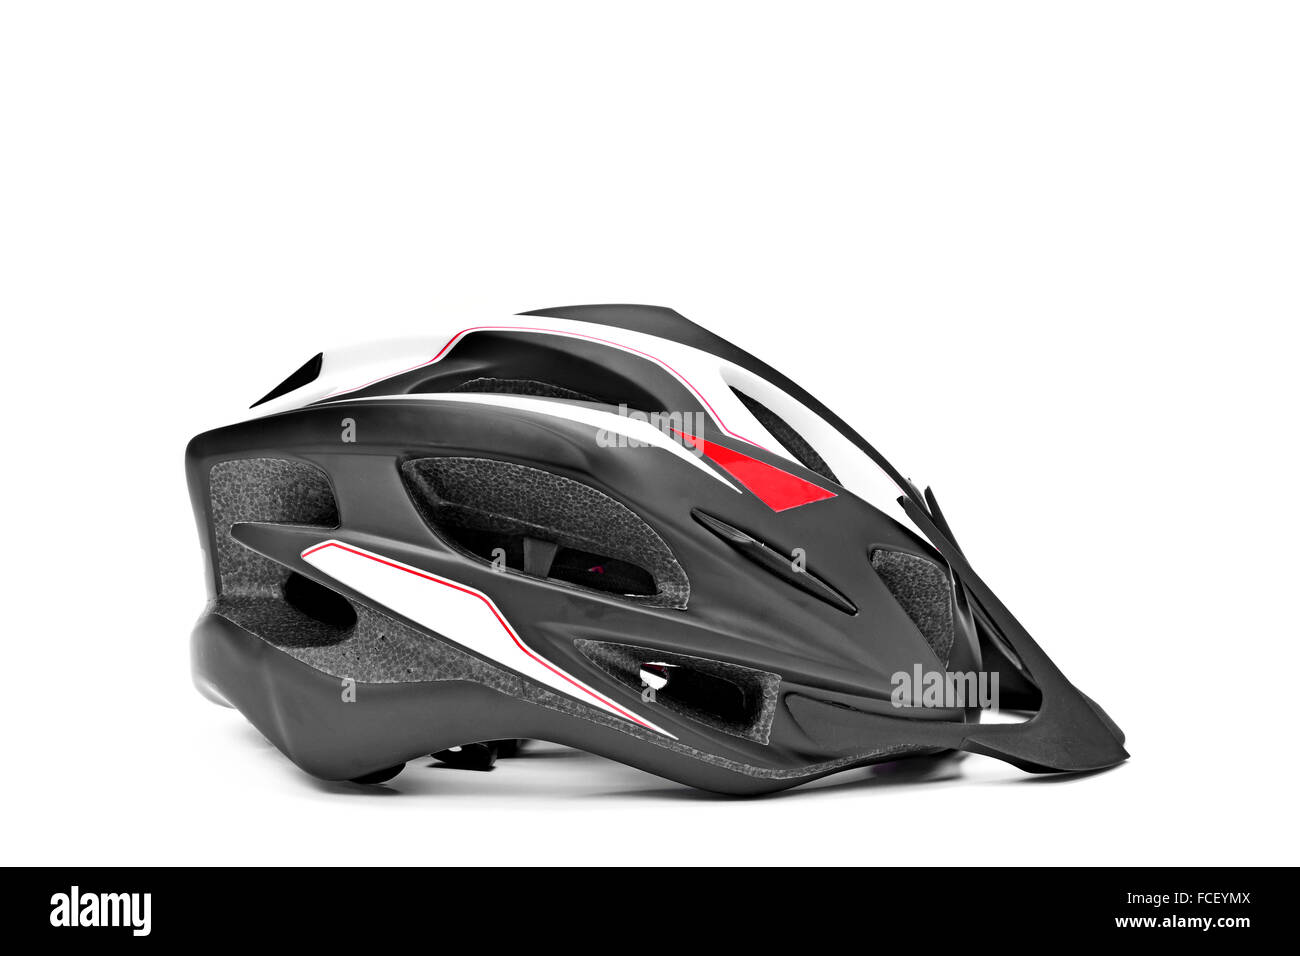 a protective helmet for different sports such as cycling or skating on a white background Stock Photo